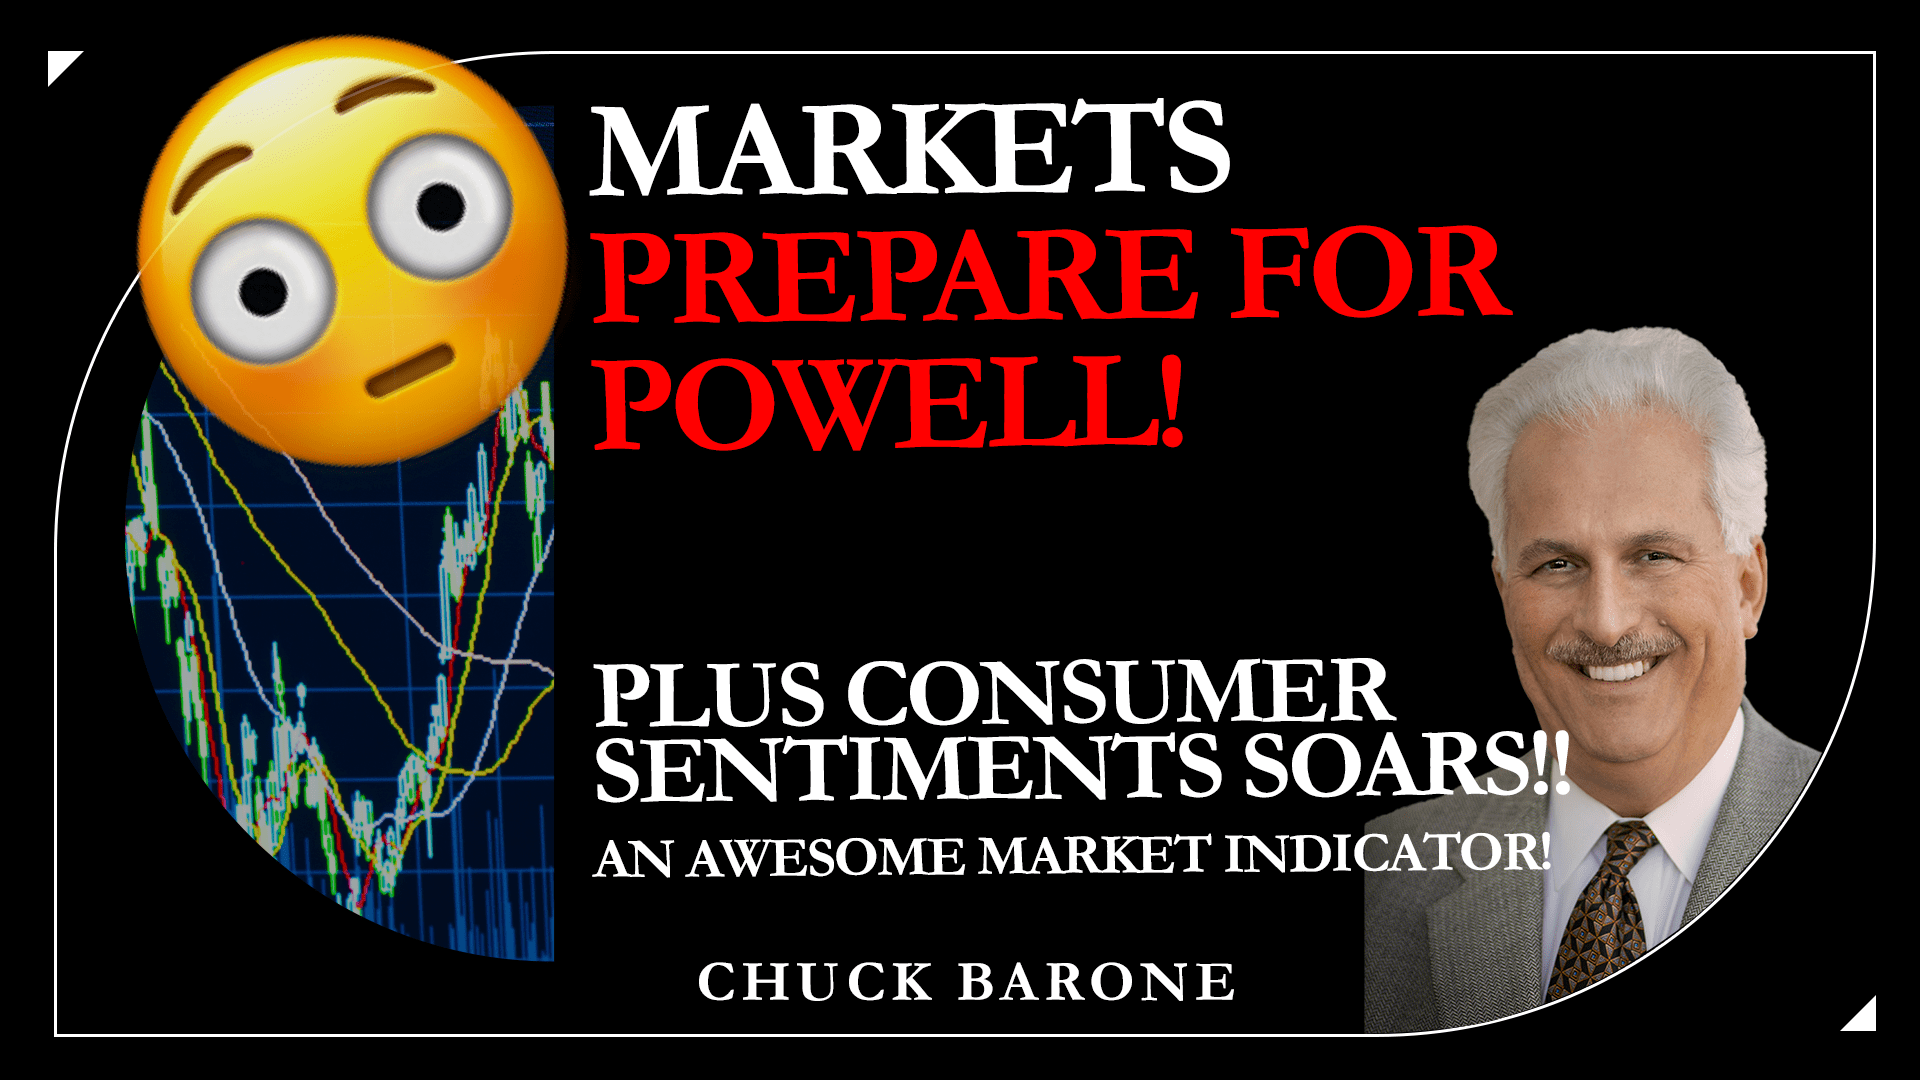 Featured image for “Markets prepare for POWELL! Plus consumer sentiments SOARS!! An AWESOME market indicator!”